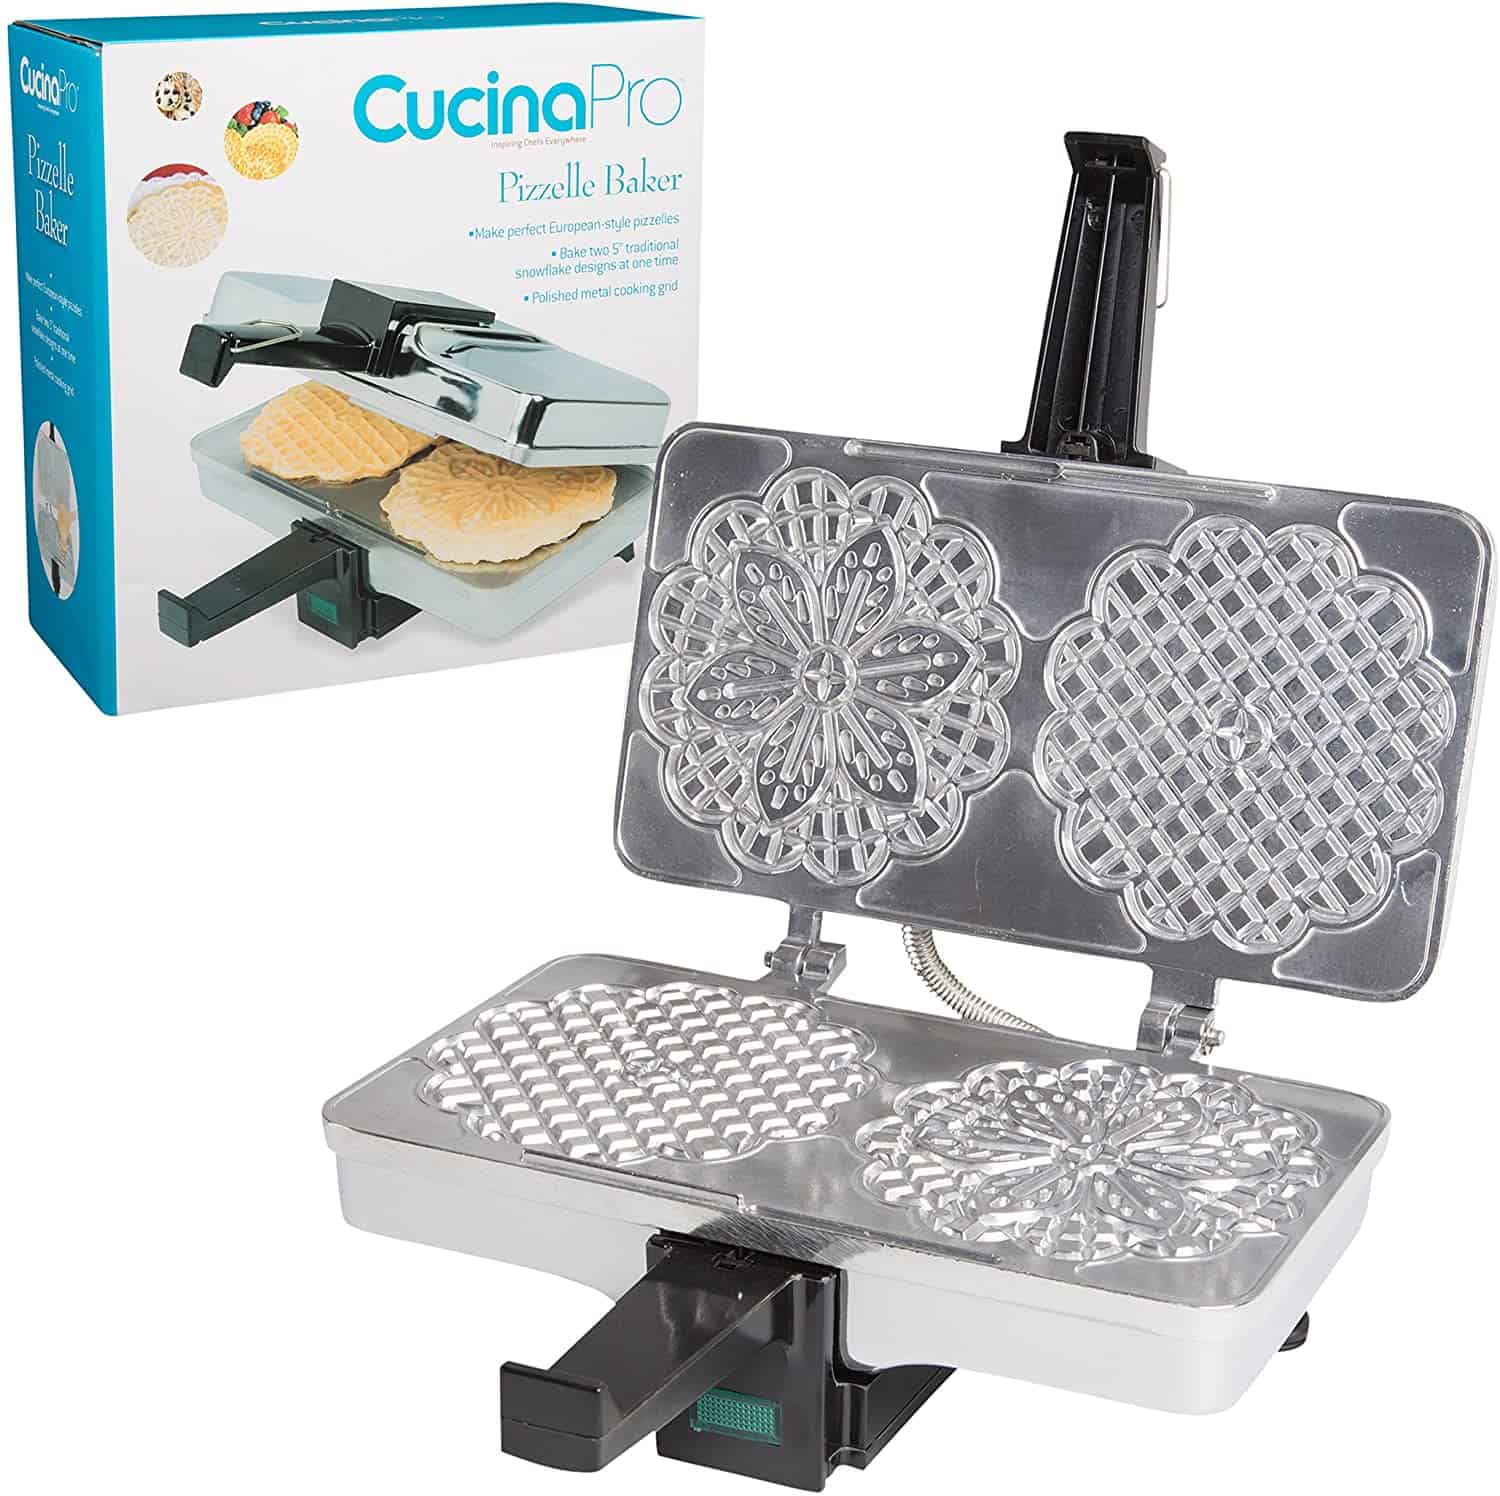 CucinaPro Polished Electric Pizzelle Maker